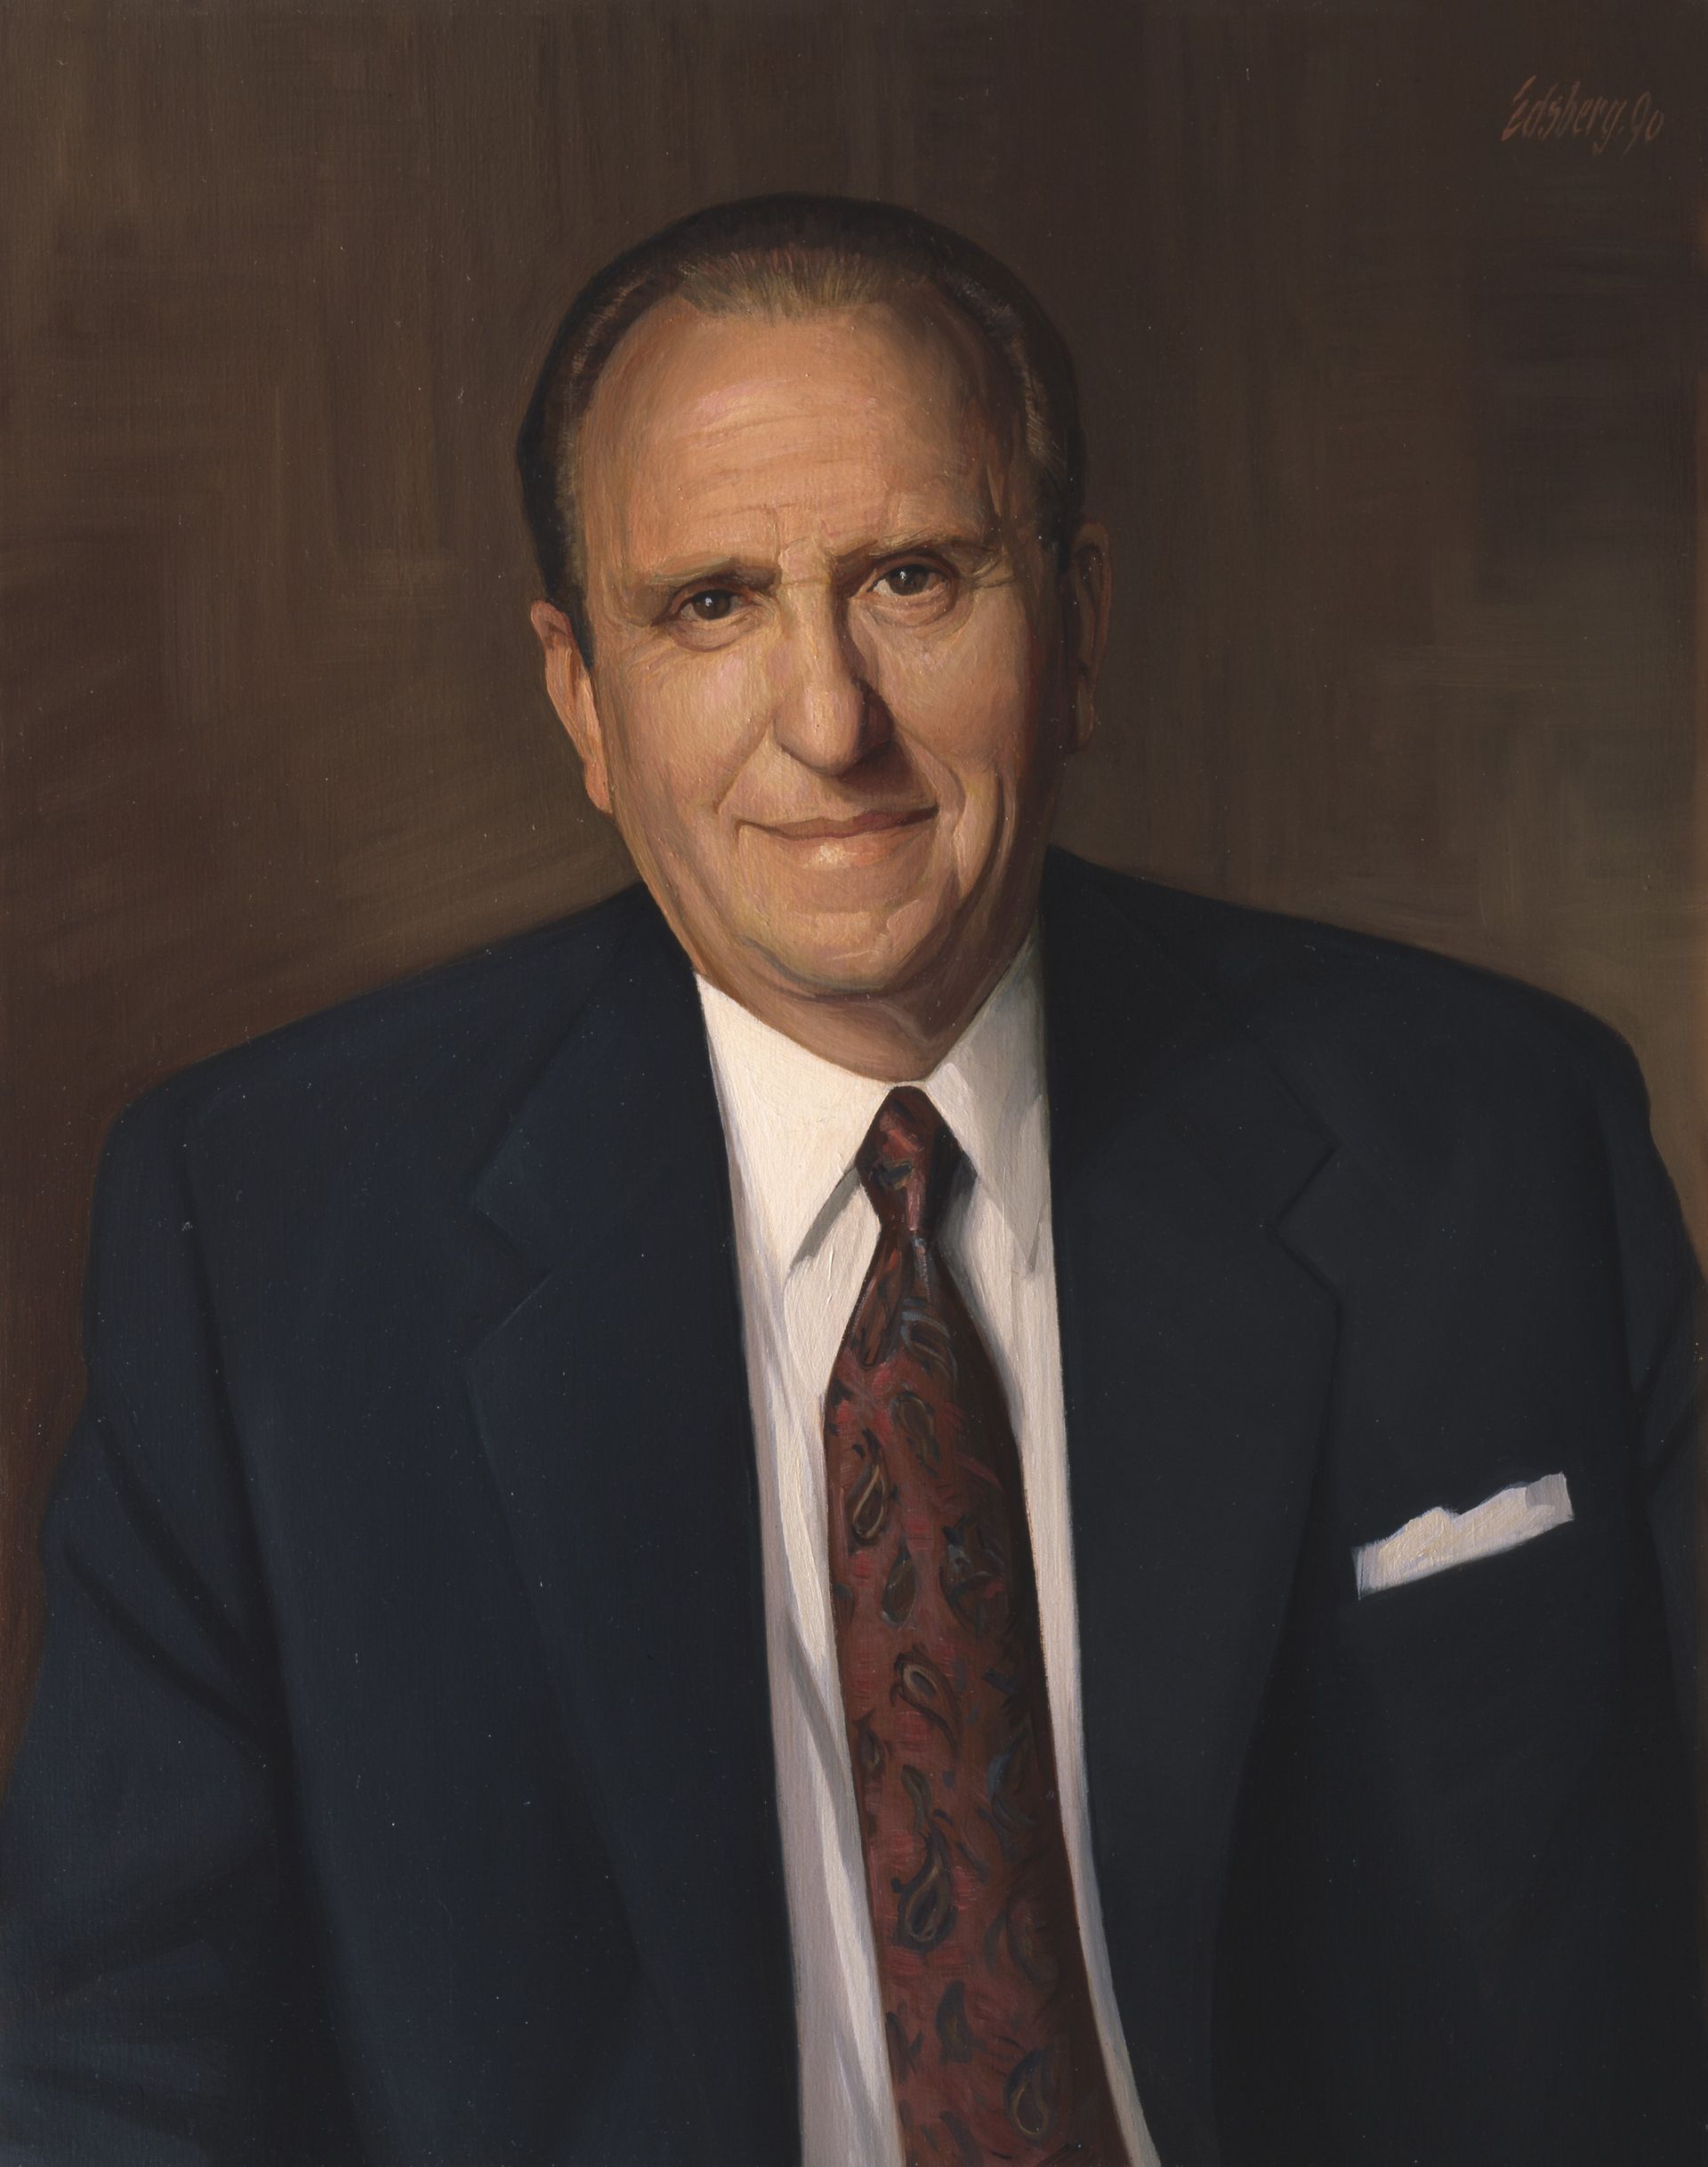 A portrait of Thomas S. Monson, who who was the 16th President of the Church from 2008 to 2018; painted by Knud Edsberg.